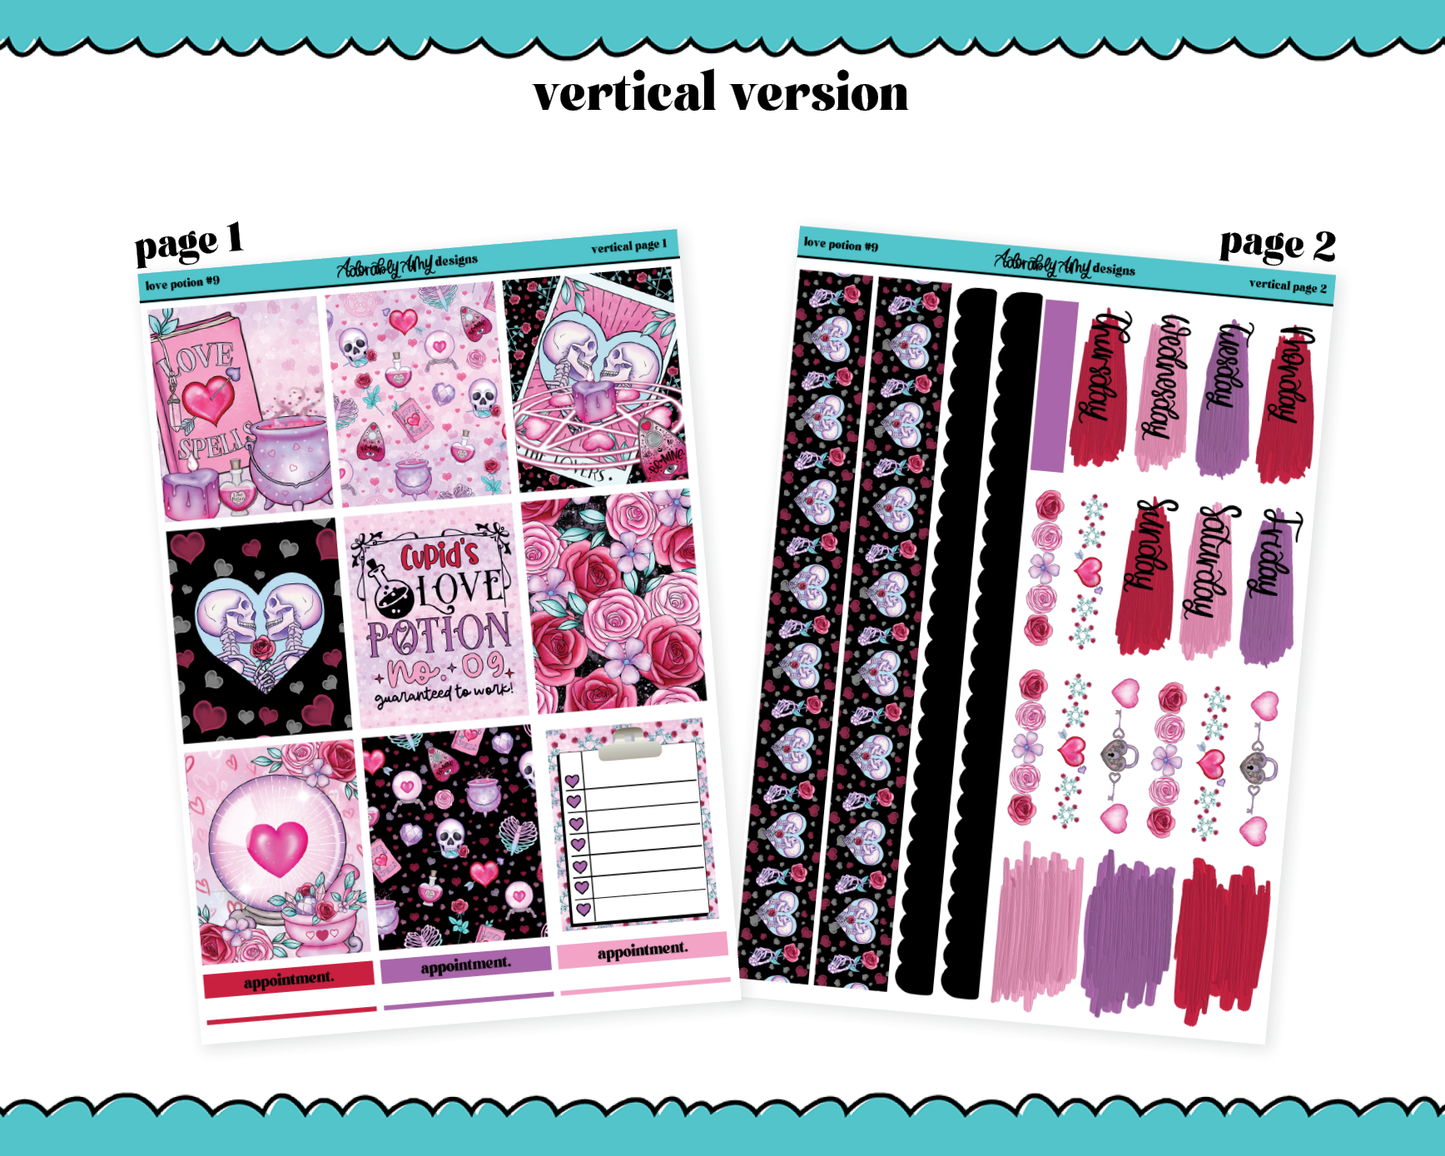 Vertical Love Potion #9 Planner Sticker Kit for Vertical Standard Size Planners or Inserts